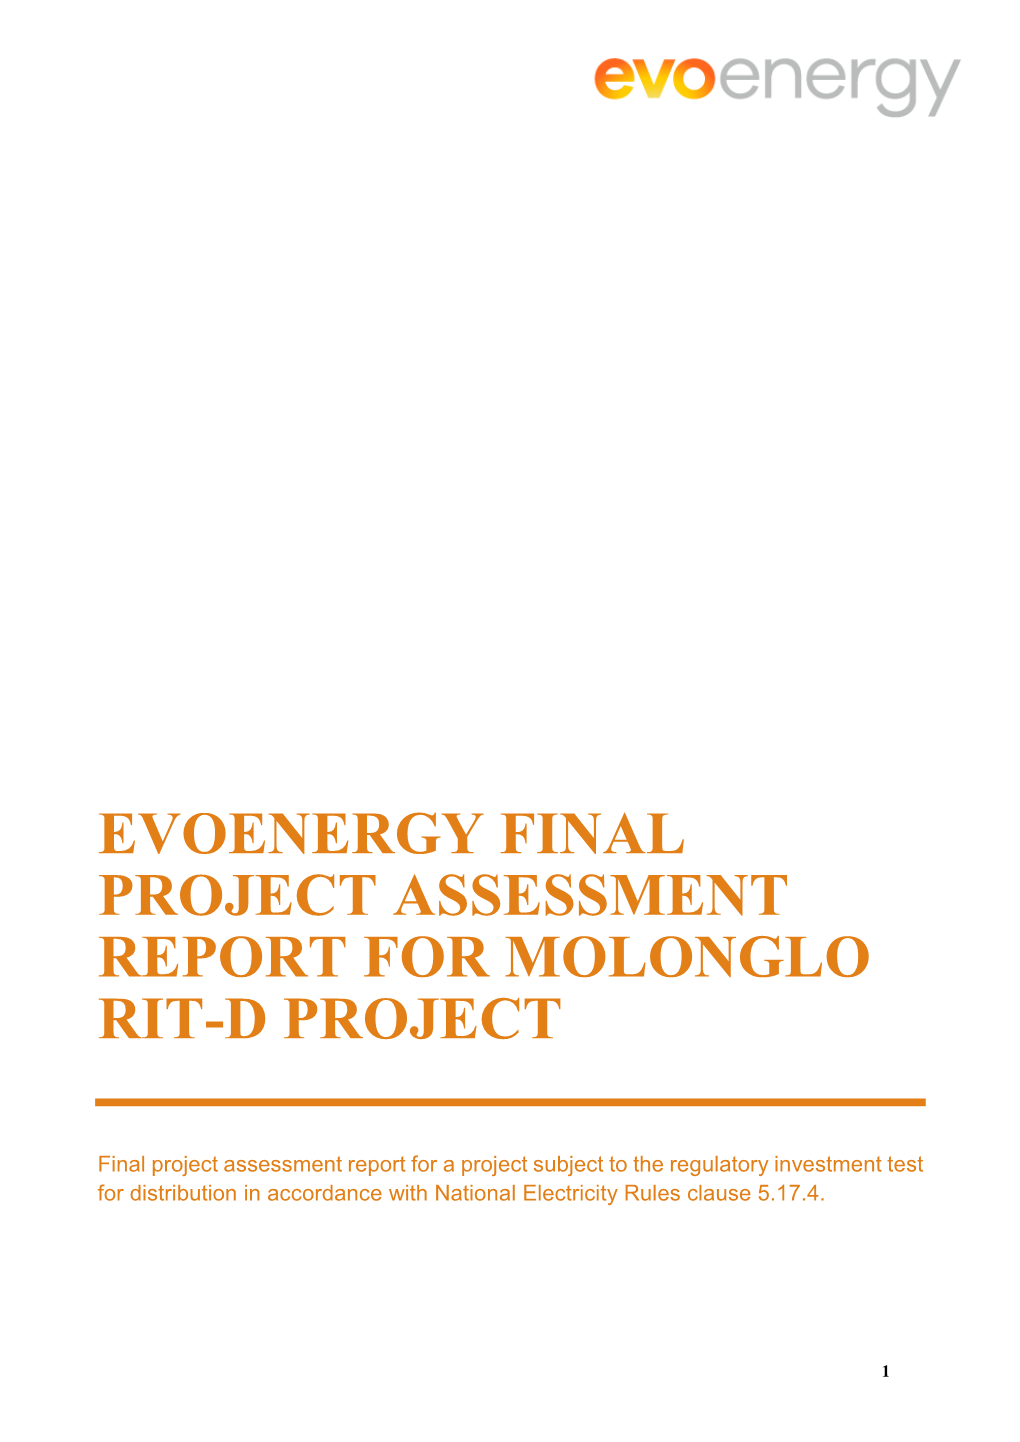 Download the Molonglo RIT-D Project Assessment Report